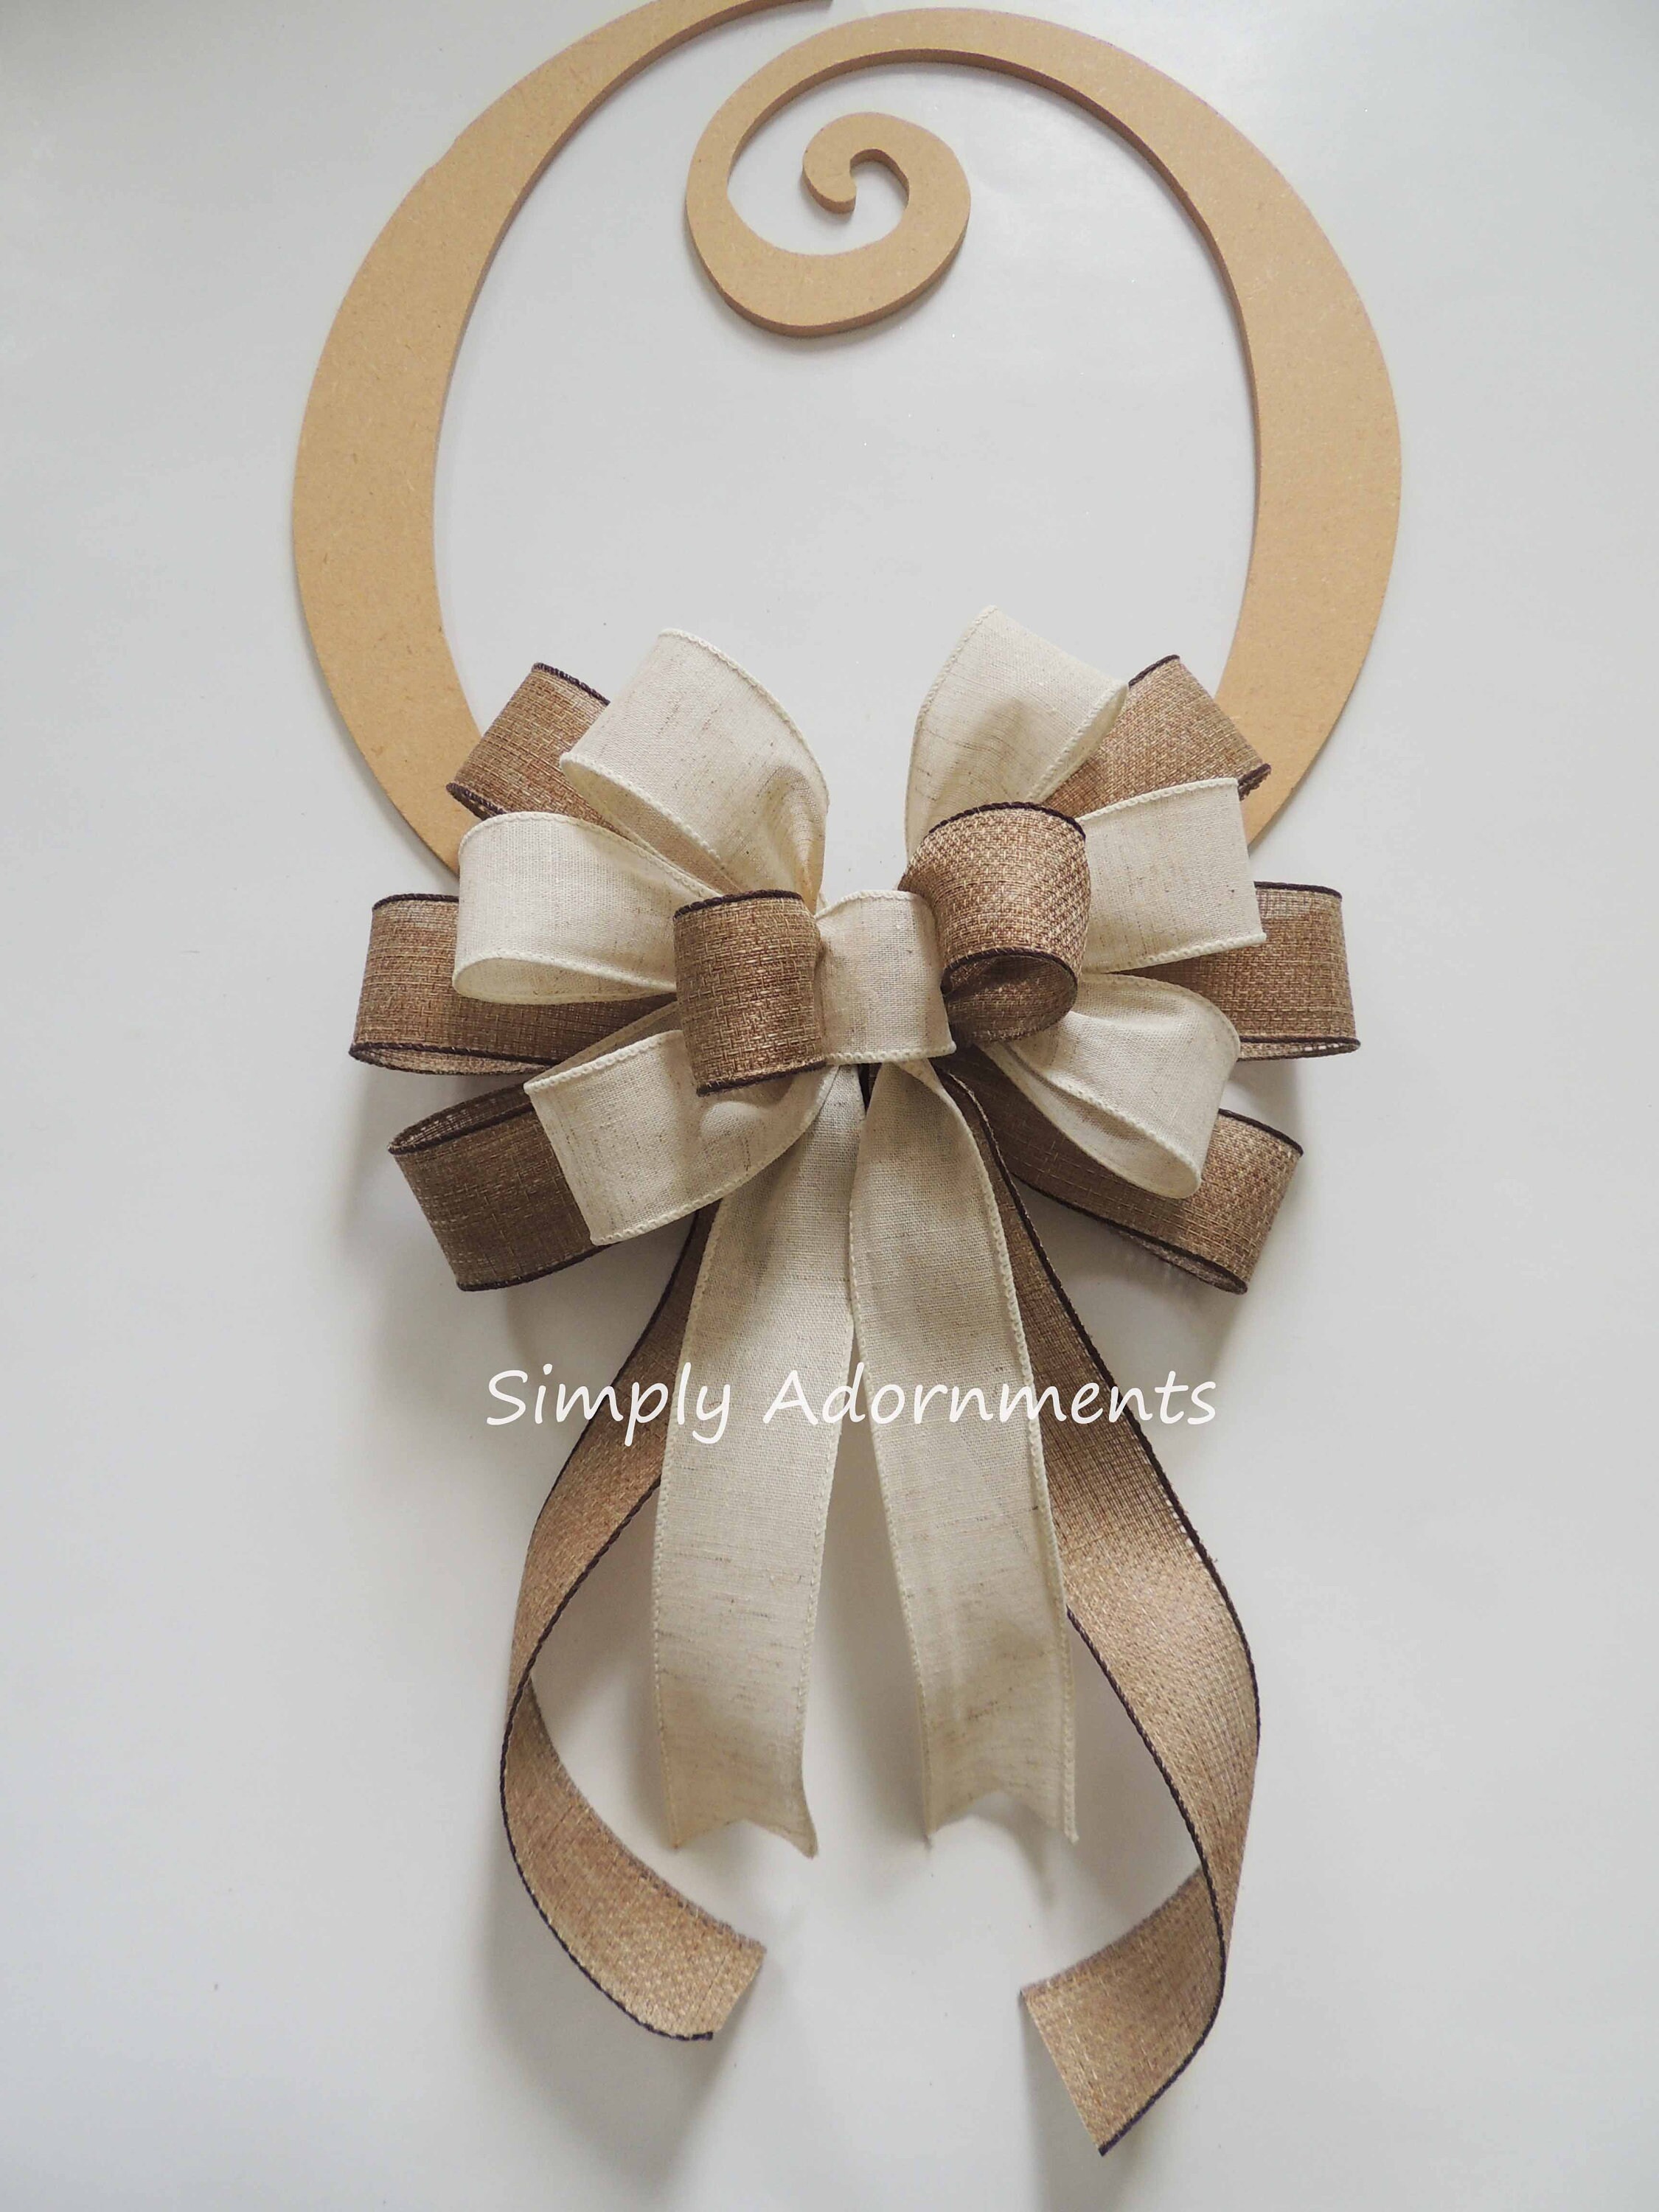 Bow Maker For Ribbon, Holiday Wreaths,Wooden Wreath Bow Maker Tool For  Creating Gift Bows, Party Decorations, Hair Bows, Corsages, Holiday  Wreaths, Va